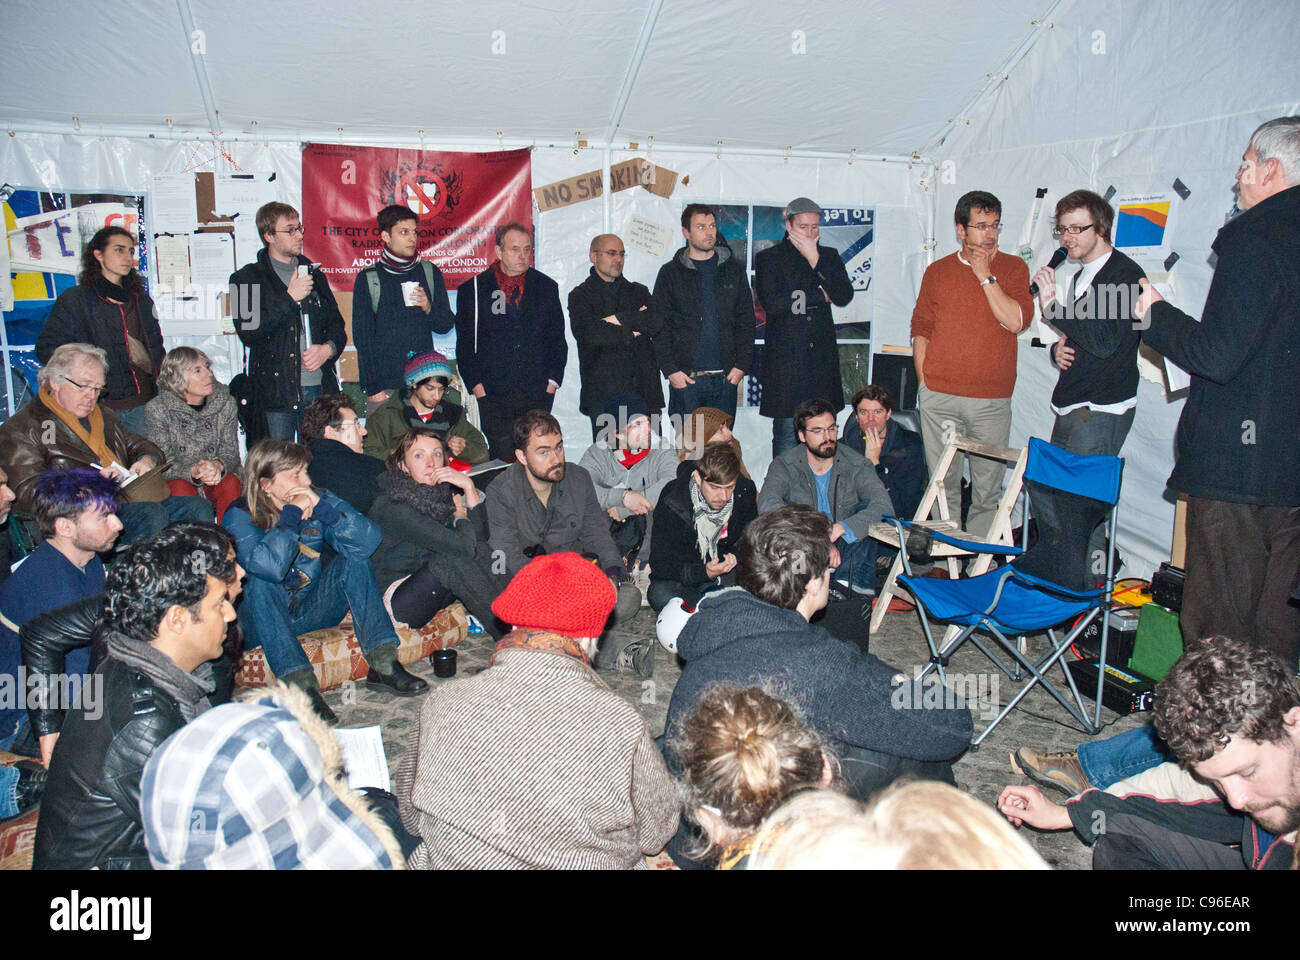 George Monbiot (brown sweater) and protesters at the Tent City University, St Pauls discussing the City of London Corporation Stock Photo